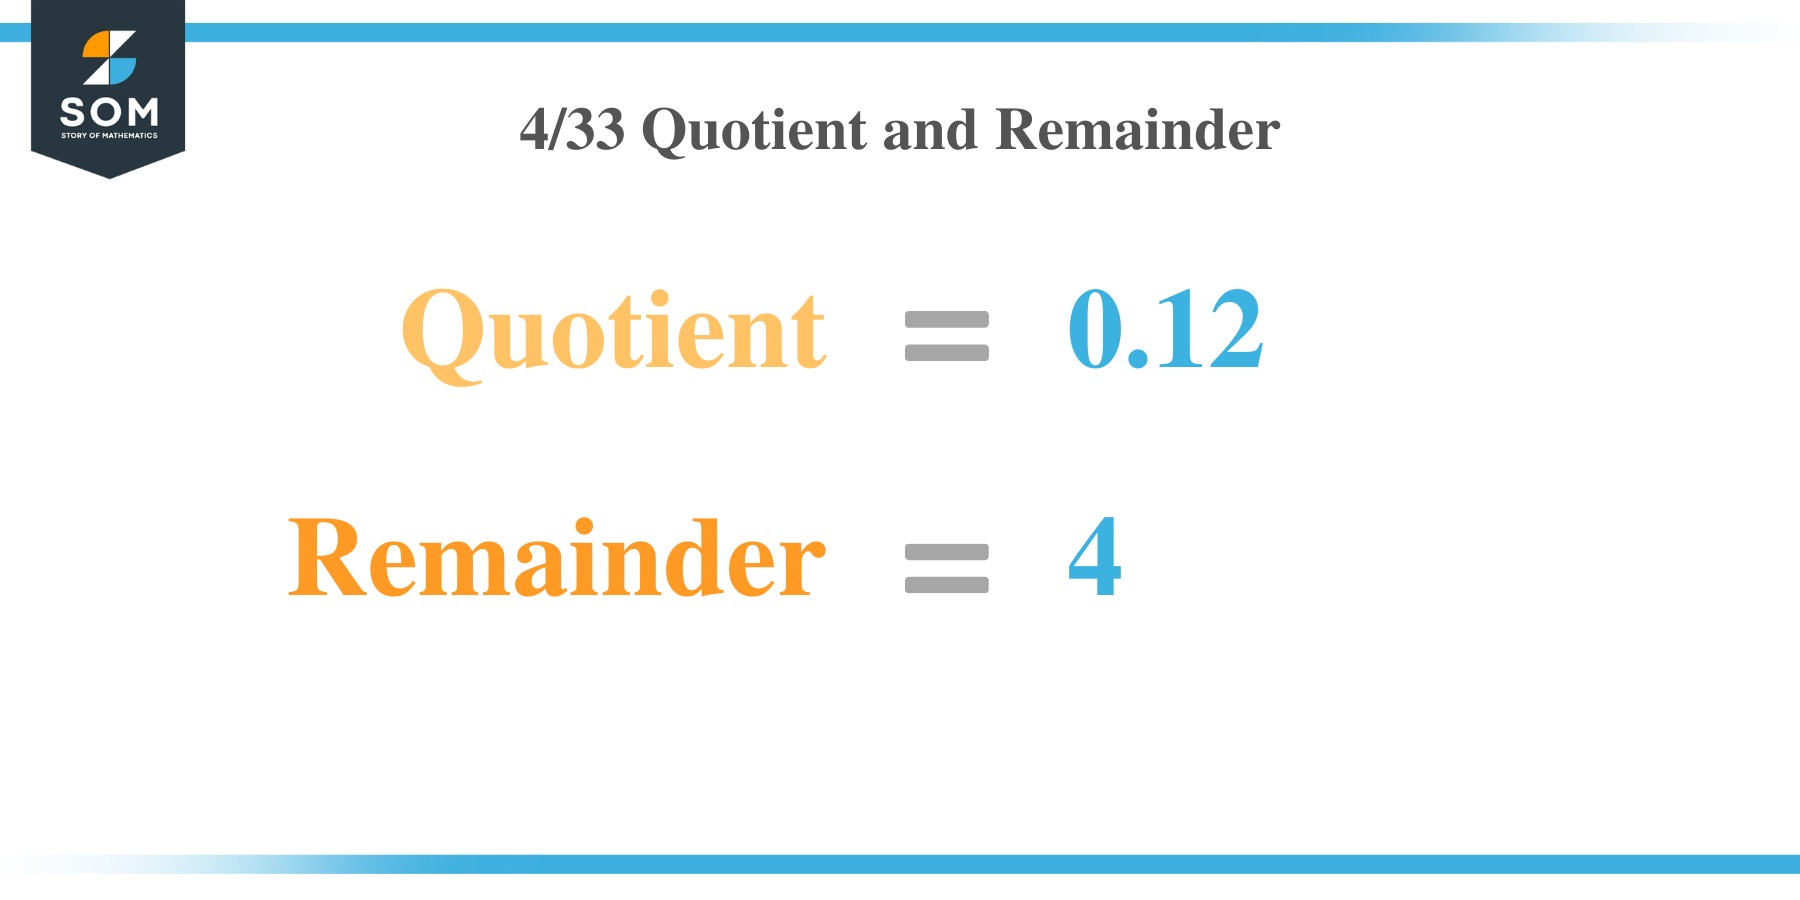 4 by 33 Quotient and Remainder